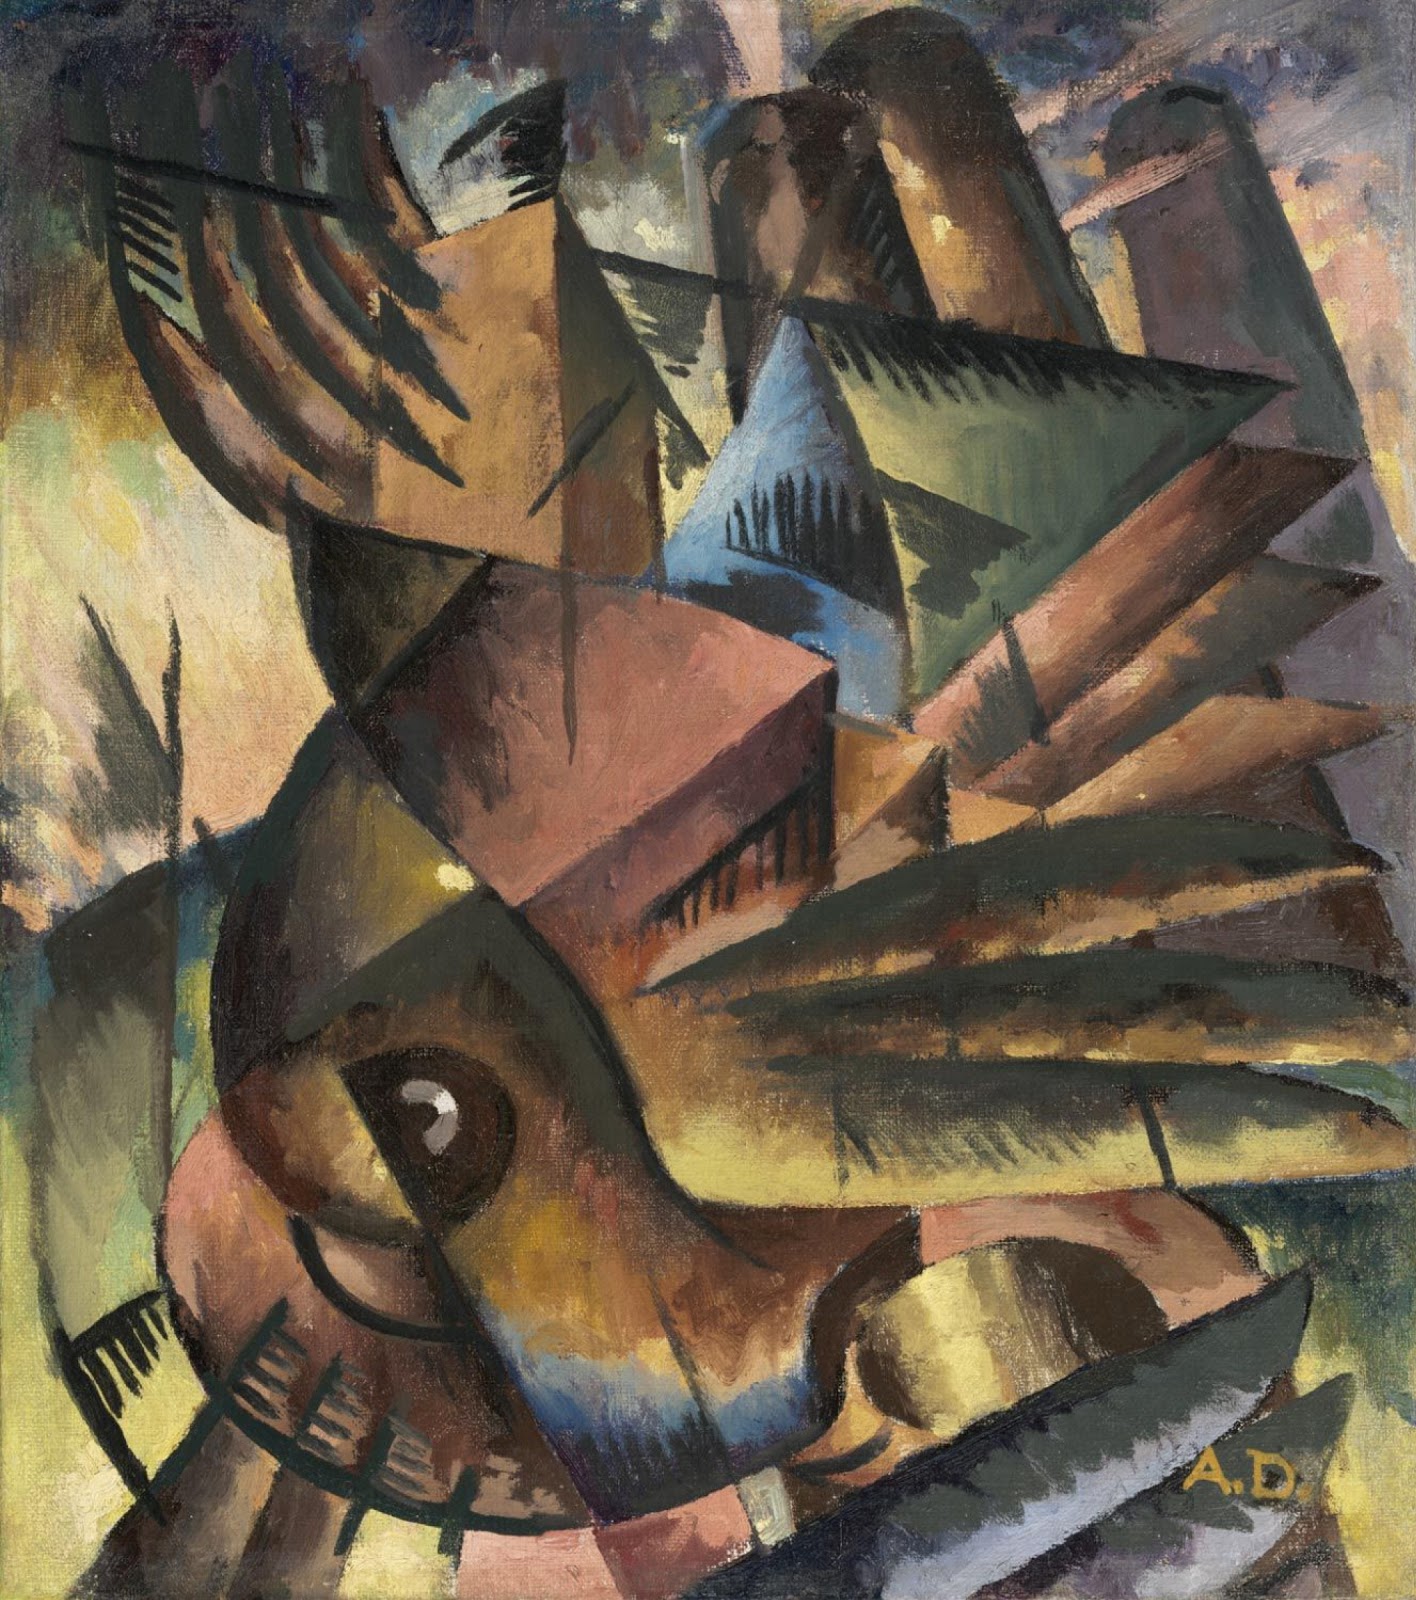 A cubist depiction of birds in flight with purples, yellows, greens, and maroons.